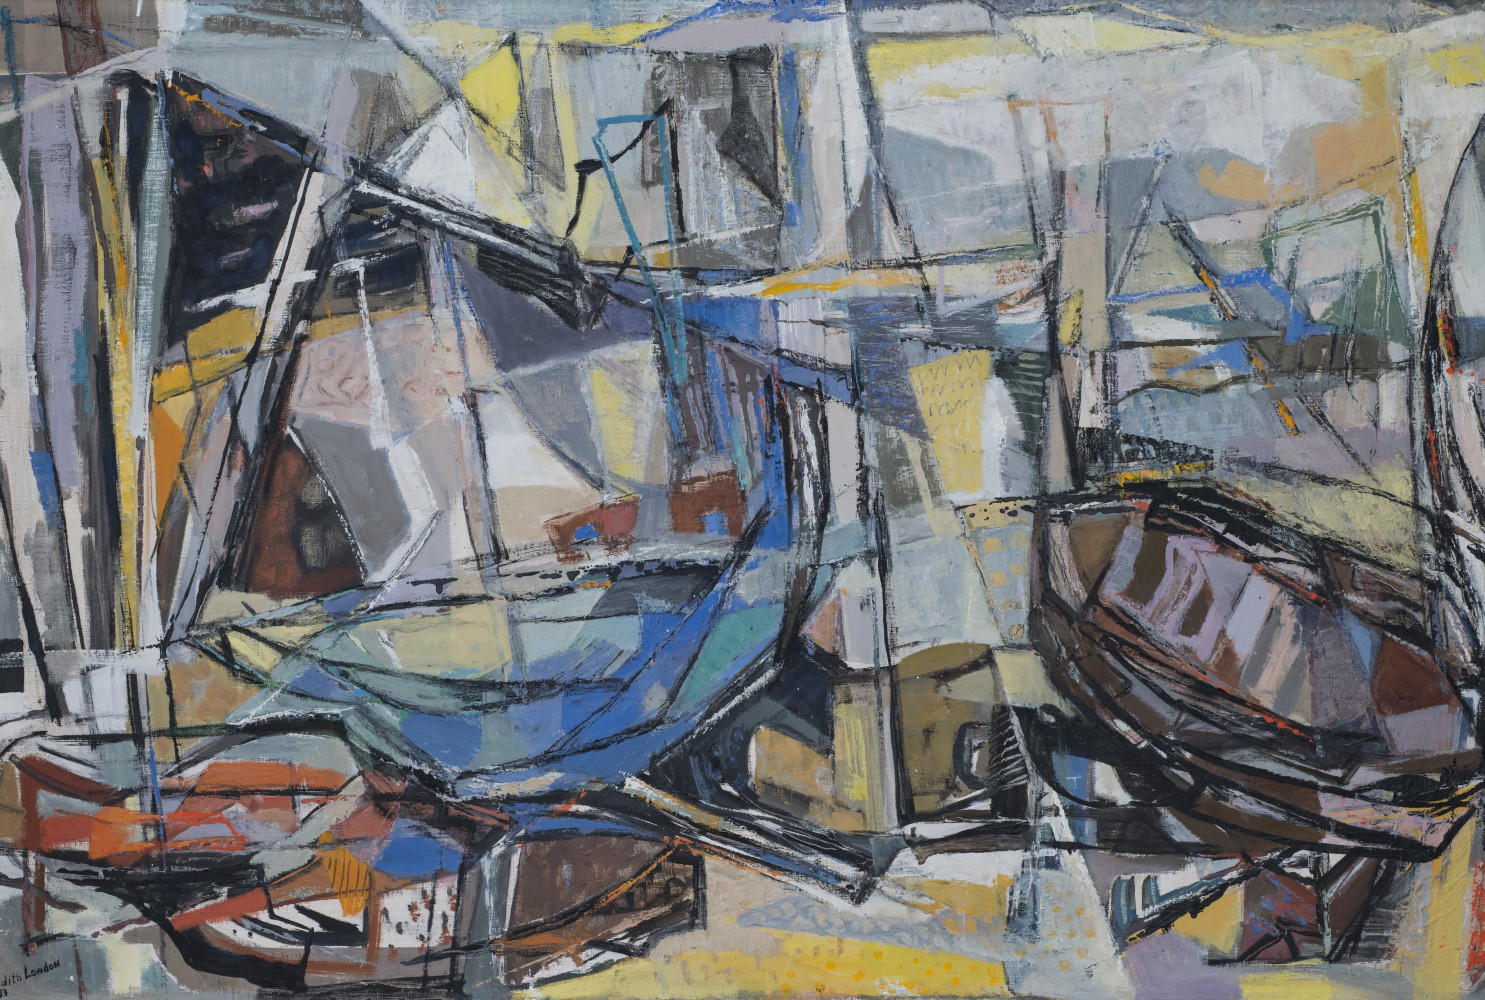 Marine Still Life, 1953, By Edith Caspary London (American, 1904 - 1997); Oil on canvas board 24 1/8 x 36 1/8 inches; Framed: 31 1/8 x 43 1/8 x 2 3/8 inches; 2004.10.04; The Johnson Collection, Spartanburg, South Carolina
